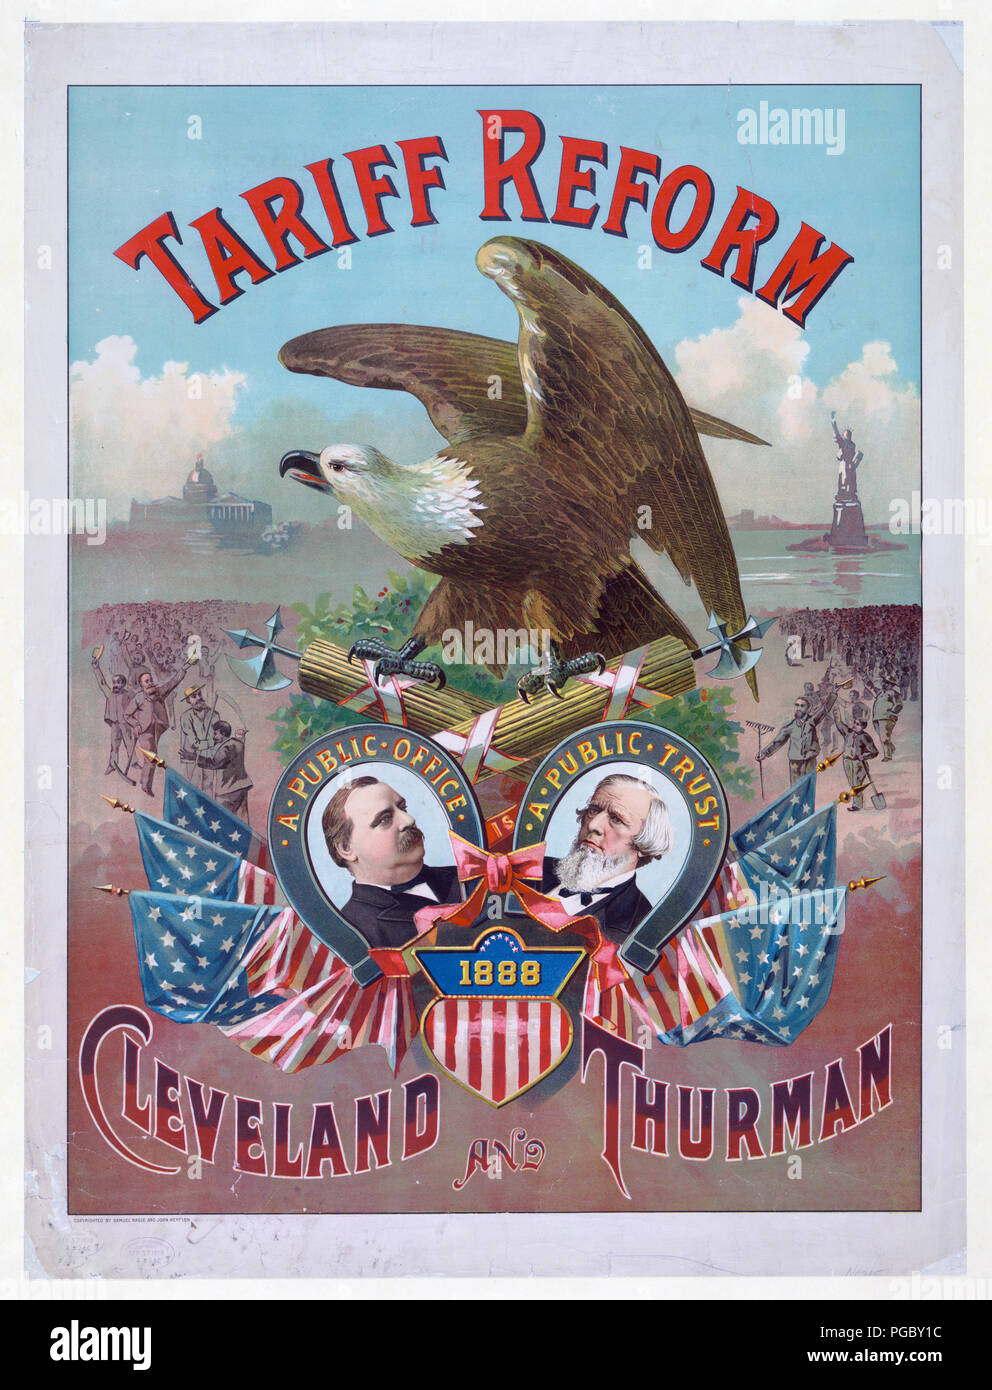 Tariff reform. Cleveland and Thurman ca 1888 Stock Photo